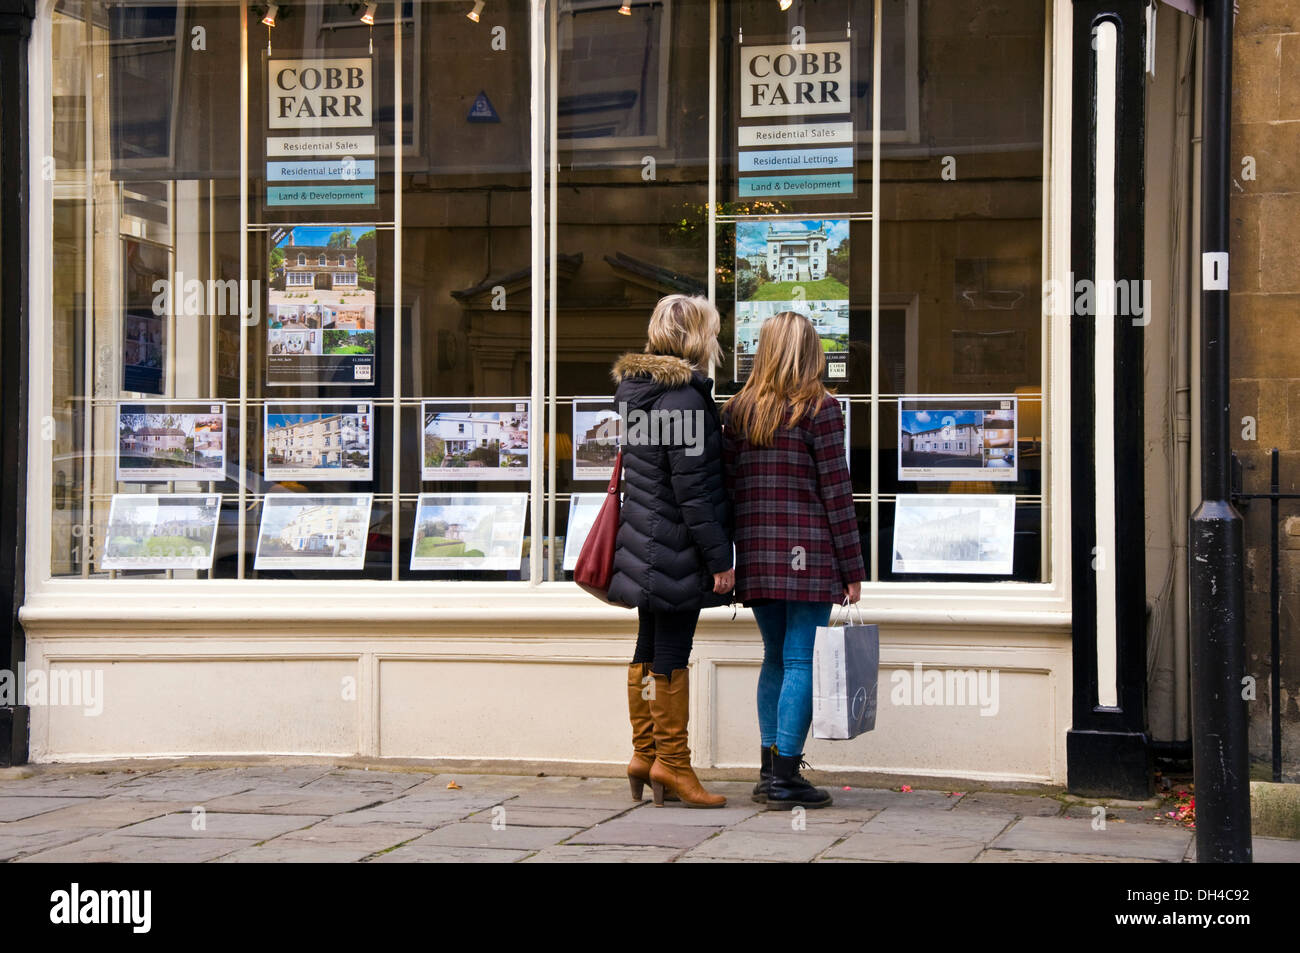 Two women look into an estate agents window in Bath Somerset England UK Stock Photo